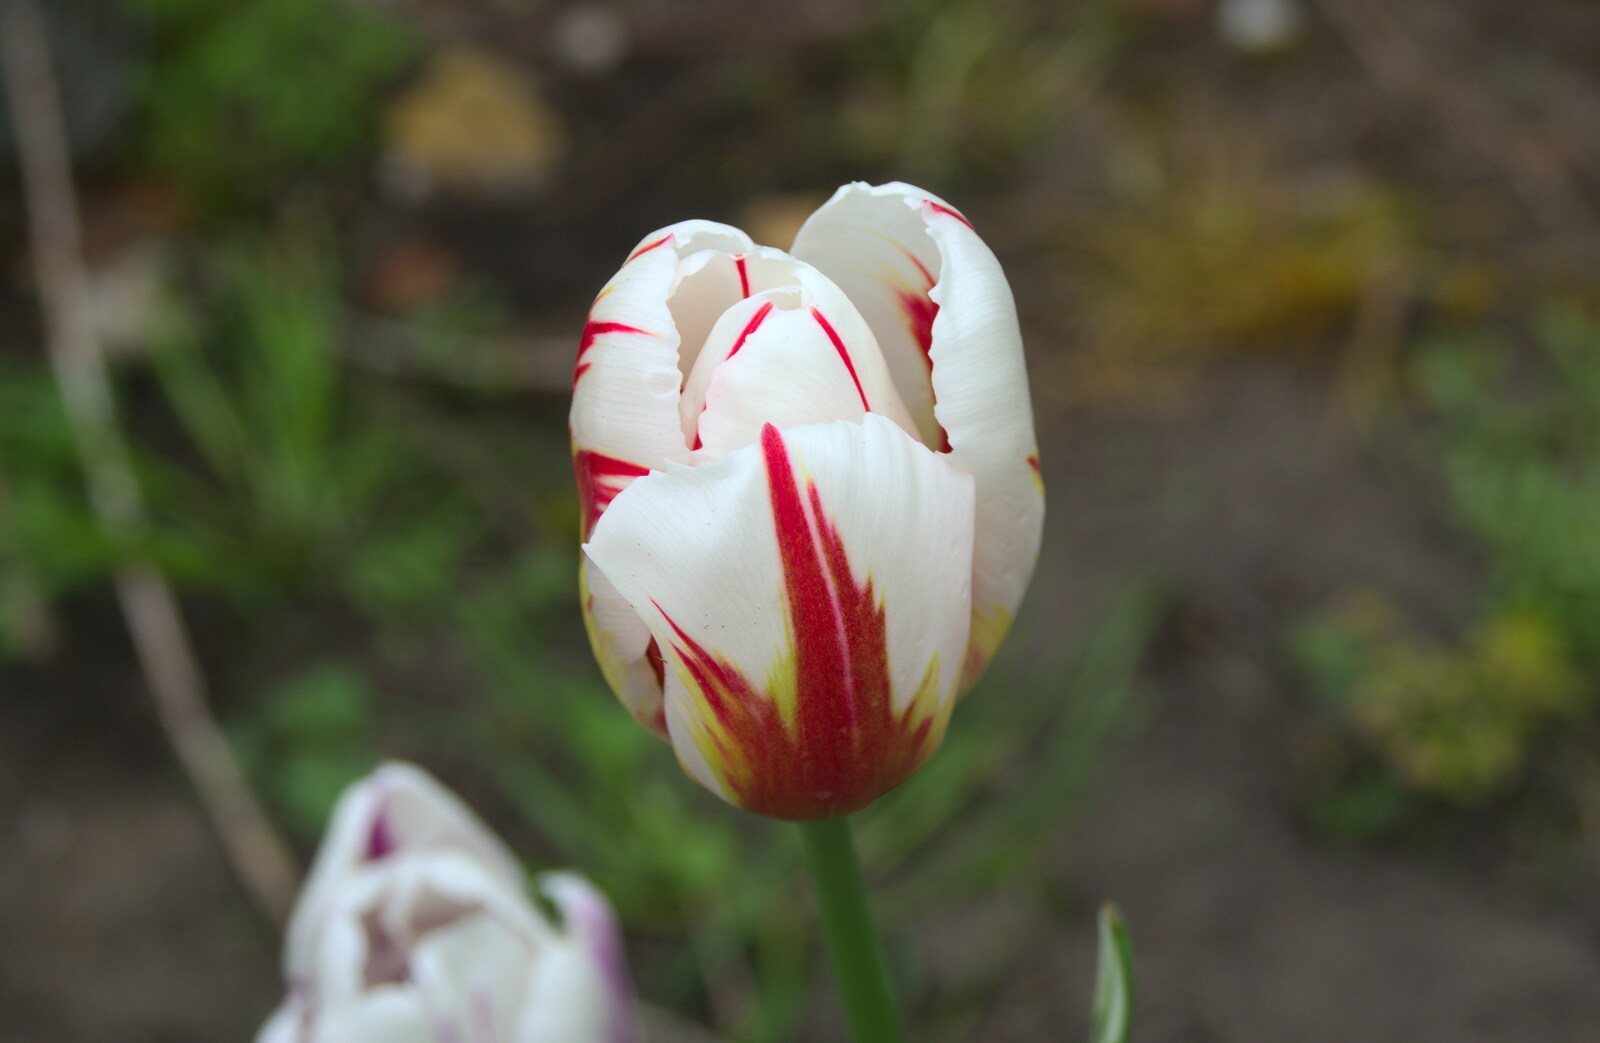 A Raspberry Ripple multi-coloured tulip from Bank Holiday Flowers, Brome, Suffolk - 6th May 2013